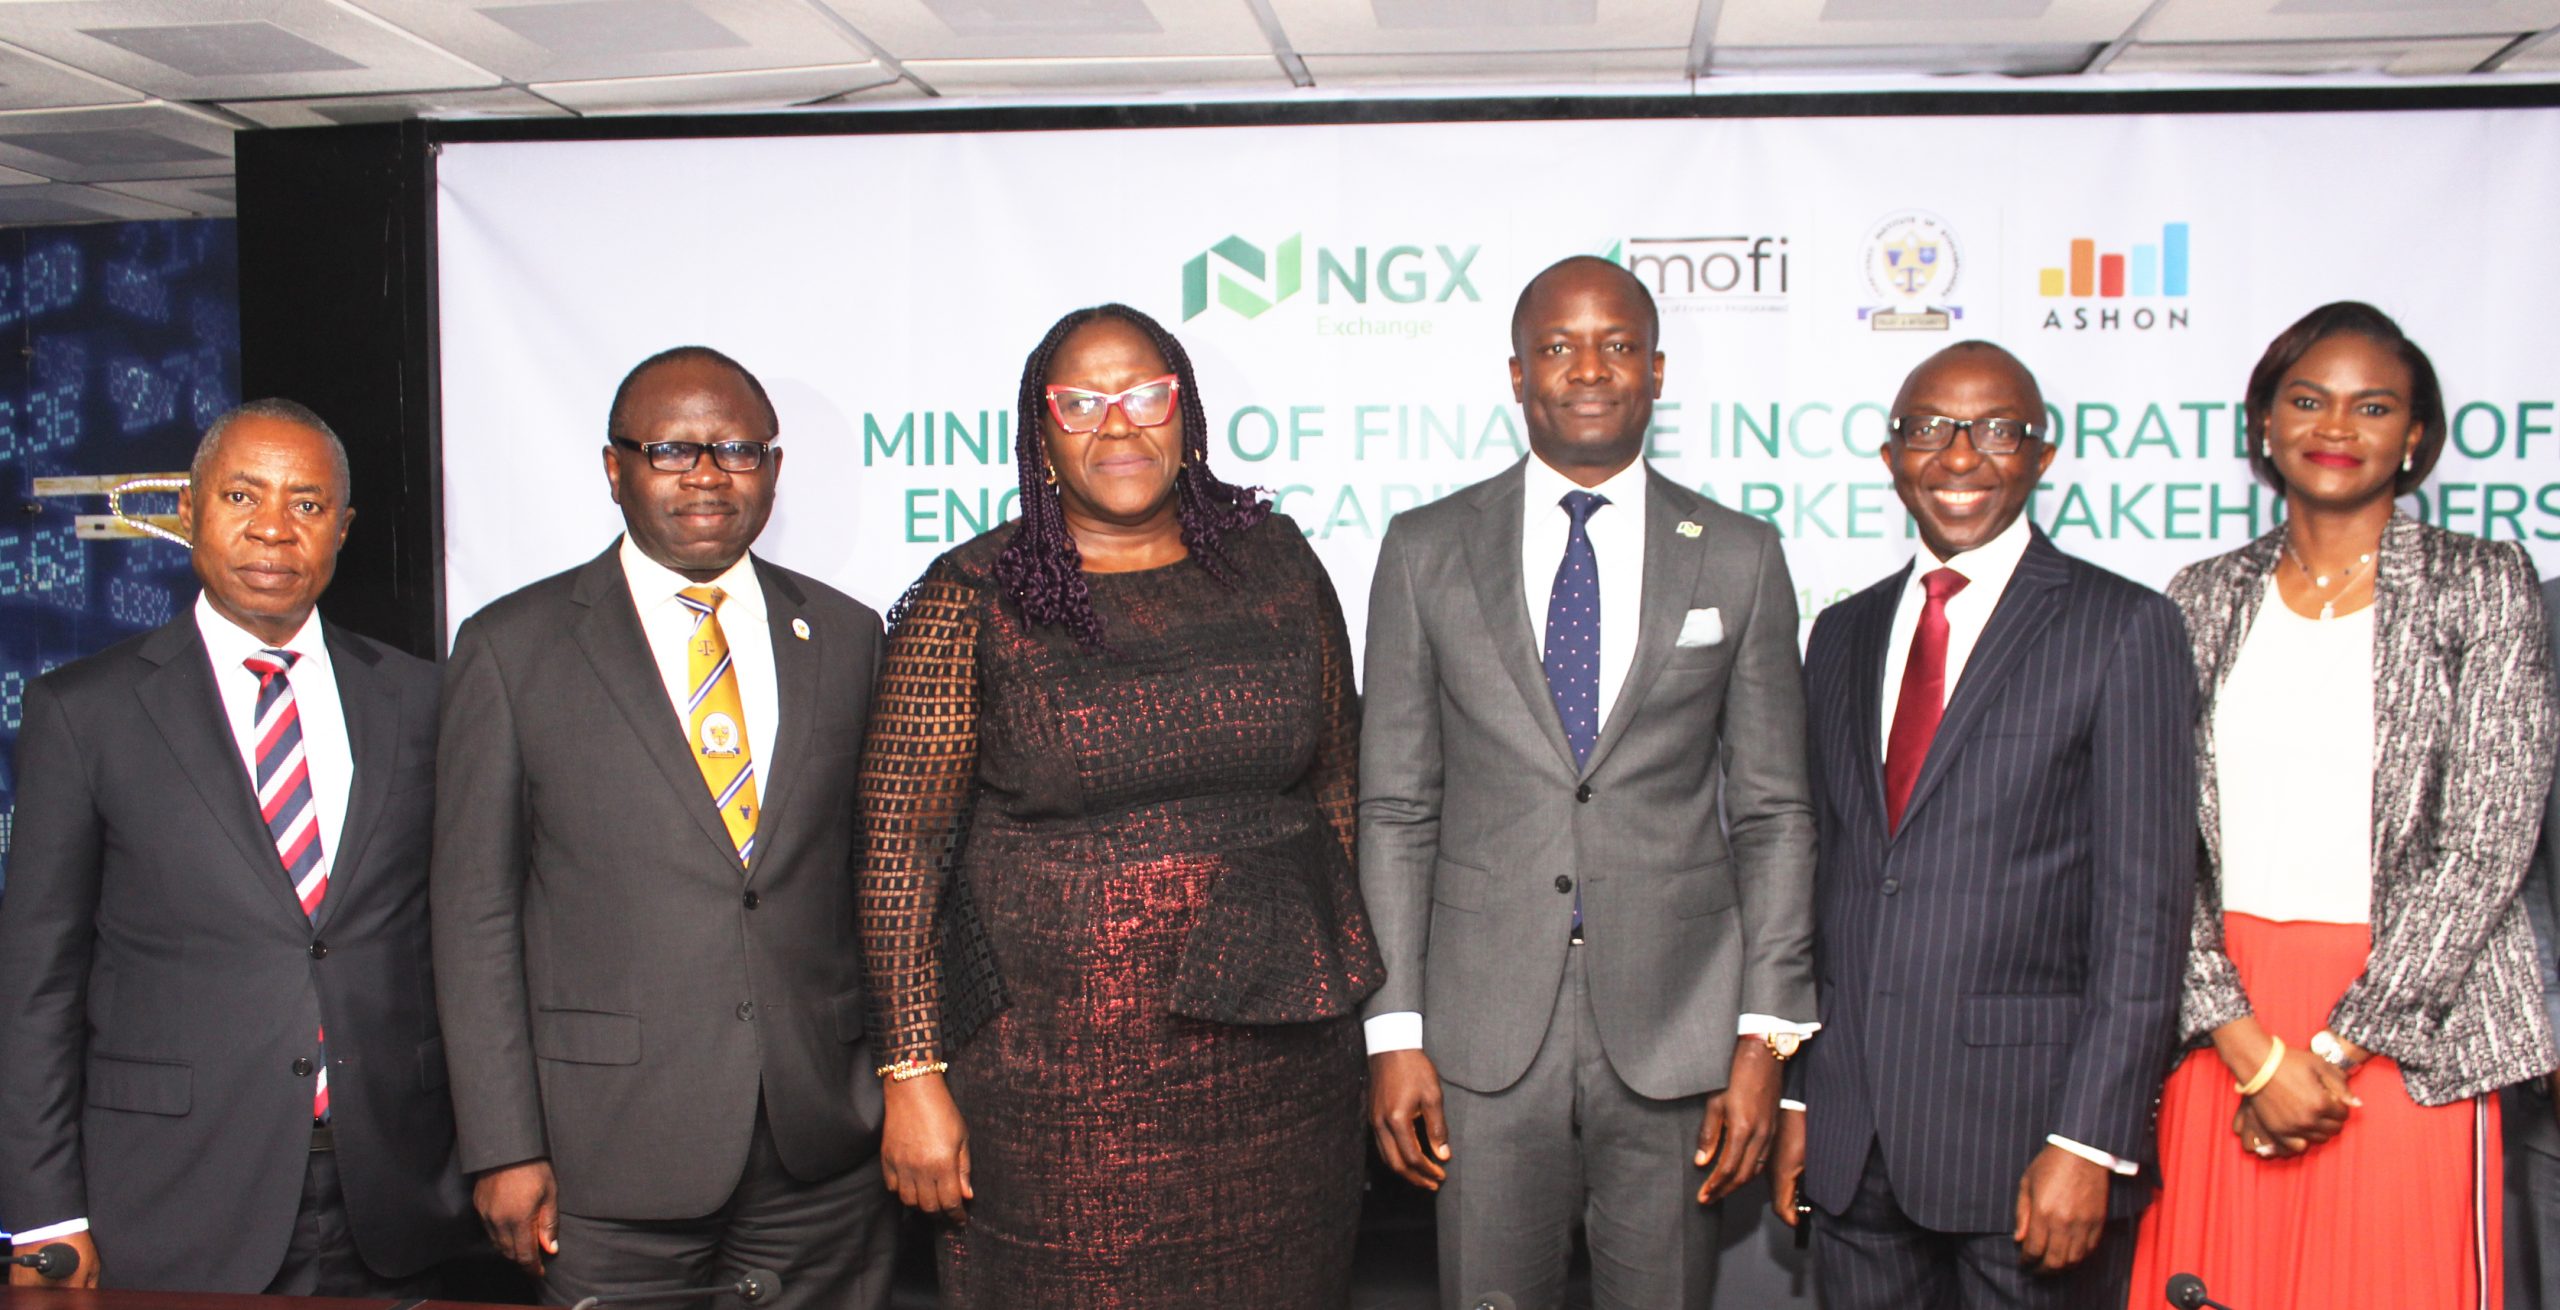 Ministry of Finance Incorporated (MOFI) visits NGX